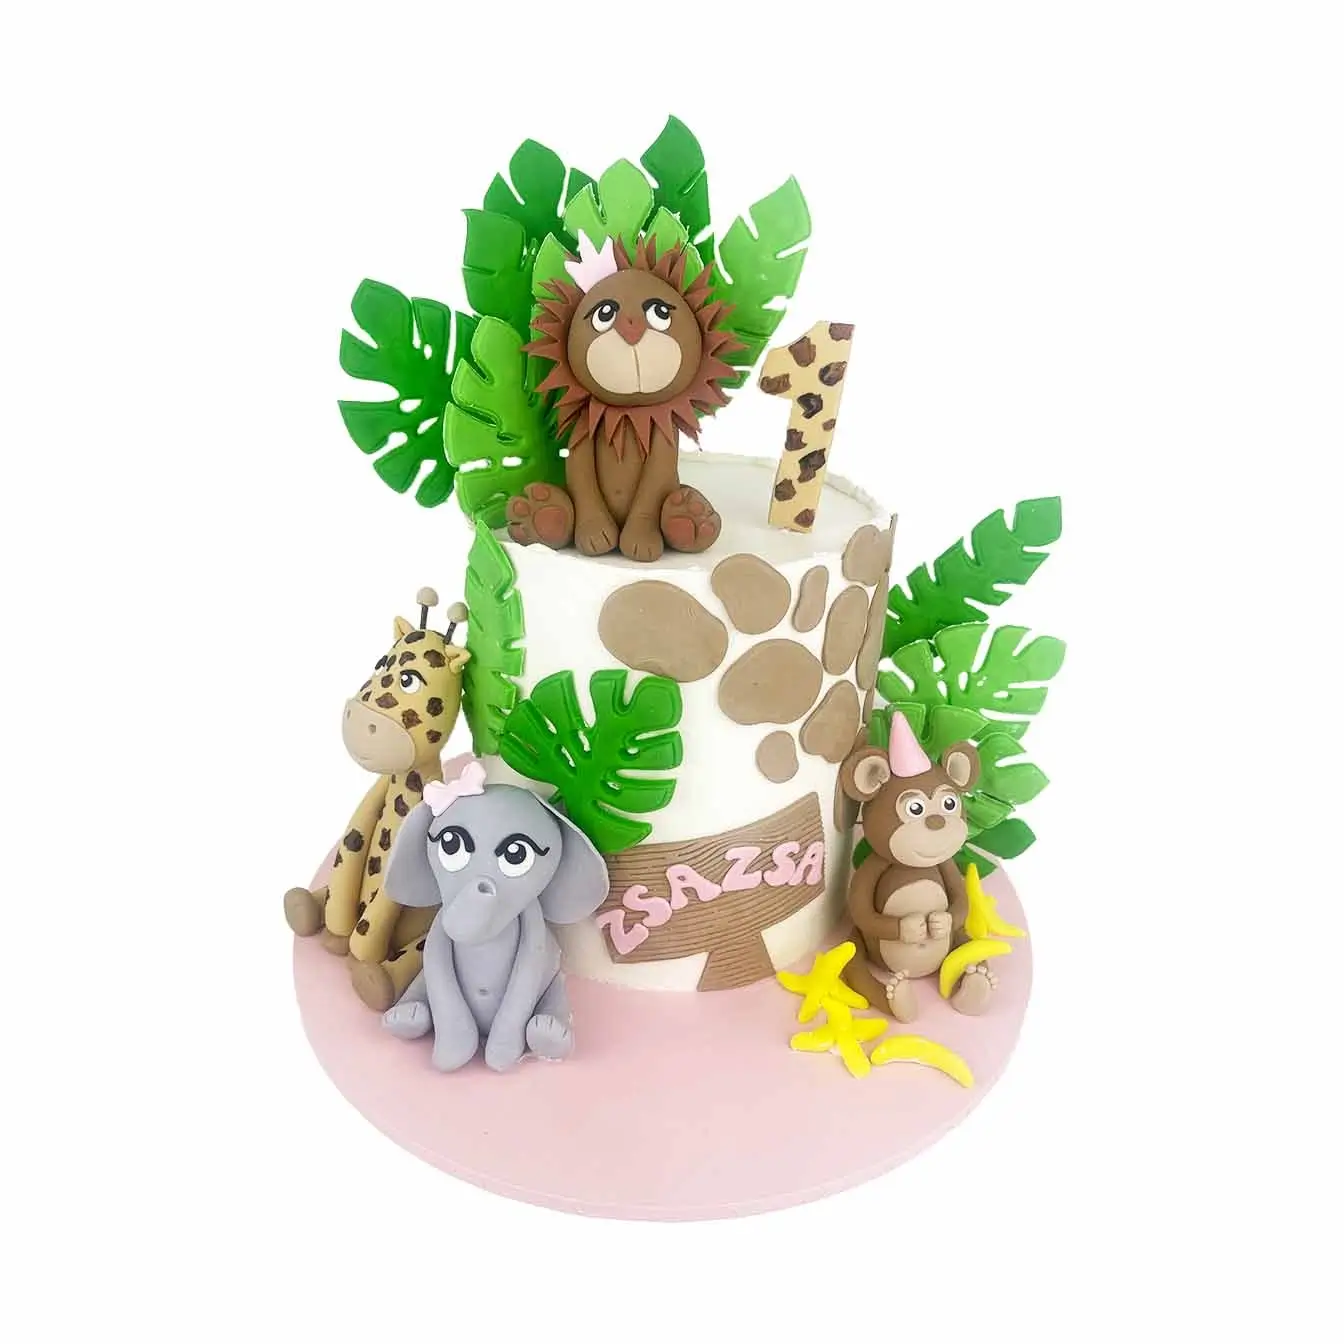 Pink Jungle Paradise Cake - A whimsical masterpiece featuring fondant leaves and edible figures of a pink monkey, lion, elephant, and giraffe. Ideal for jungle-themed celebrations, this enchanting pink creation adds a delightful touch to your festivities.